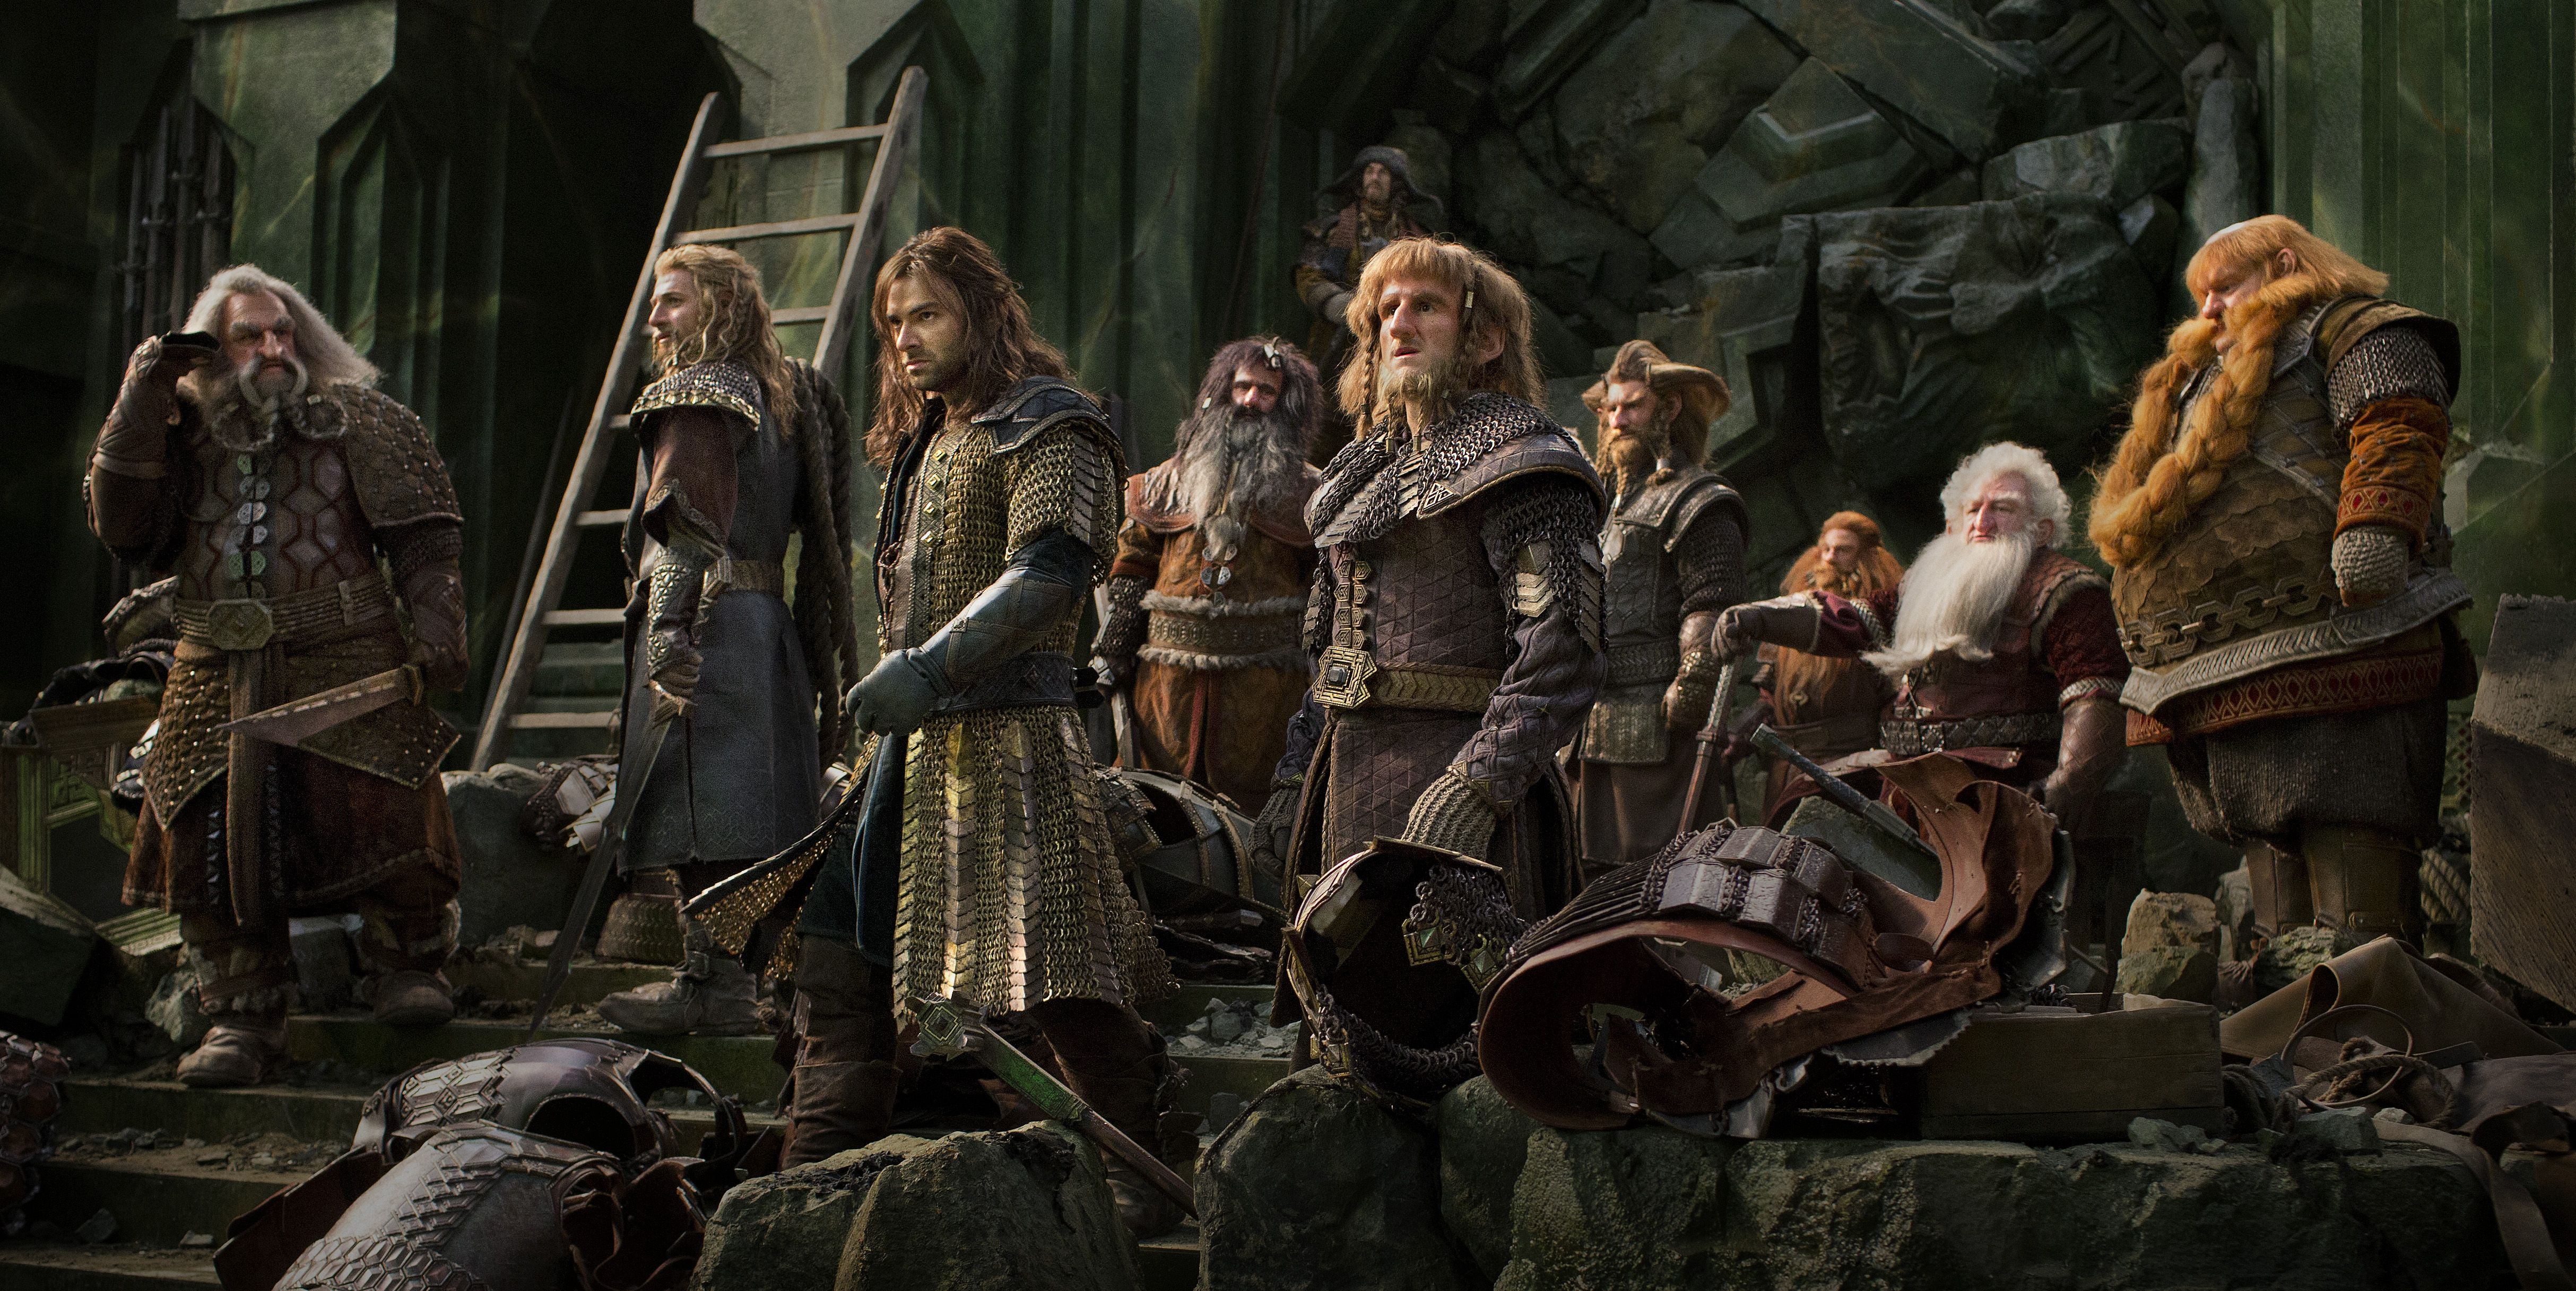 Dwarfs in The Hobbit: The Battle of the Five Armies